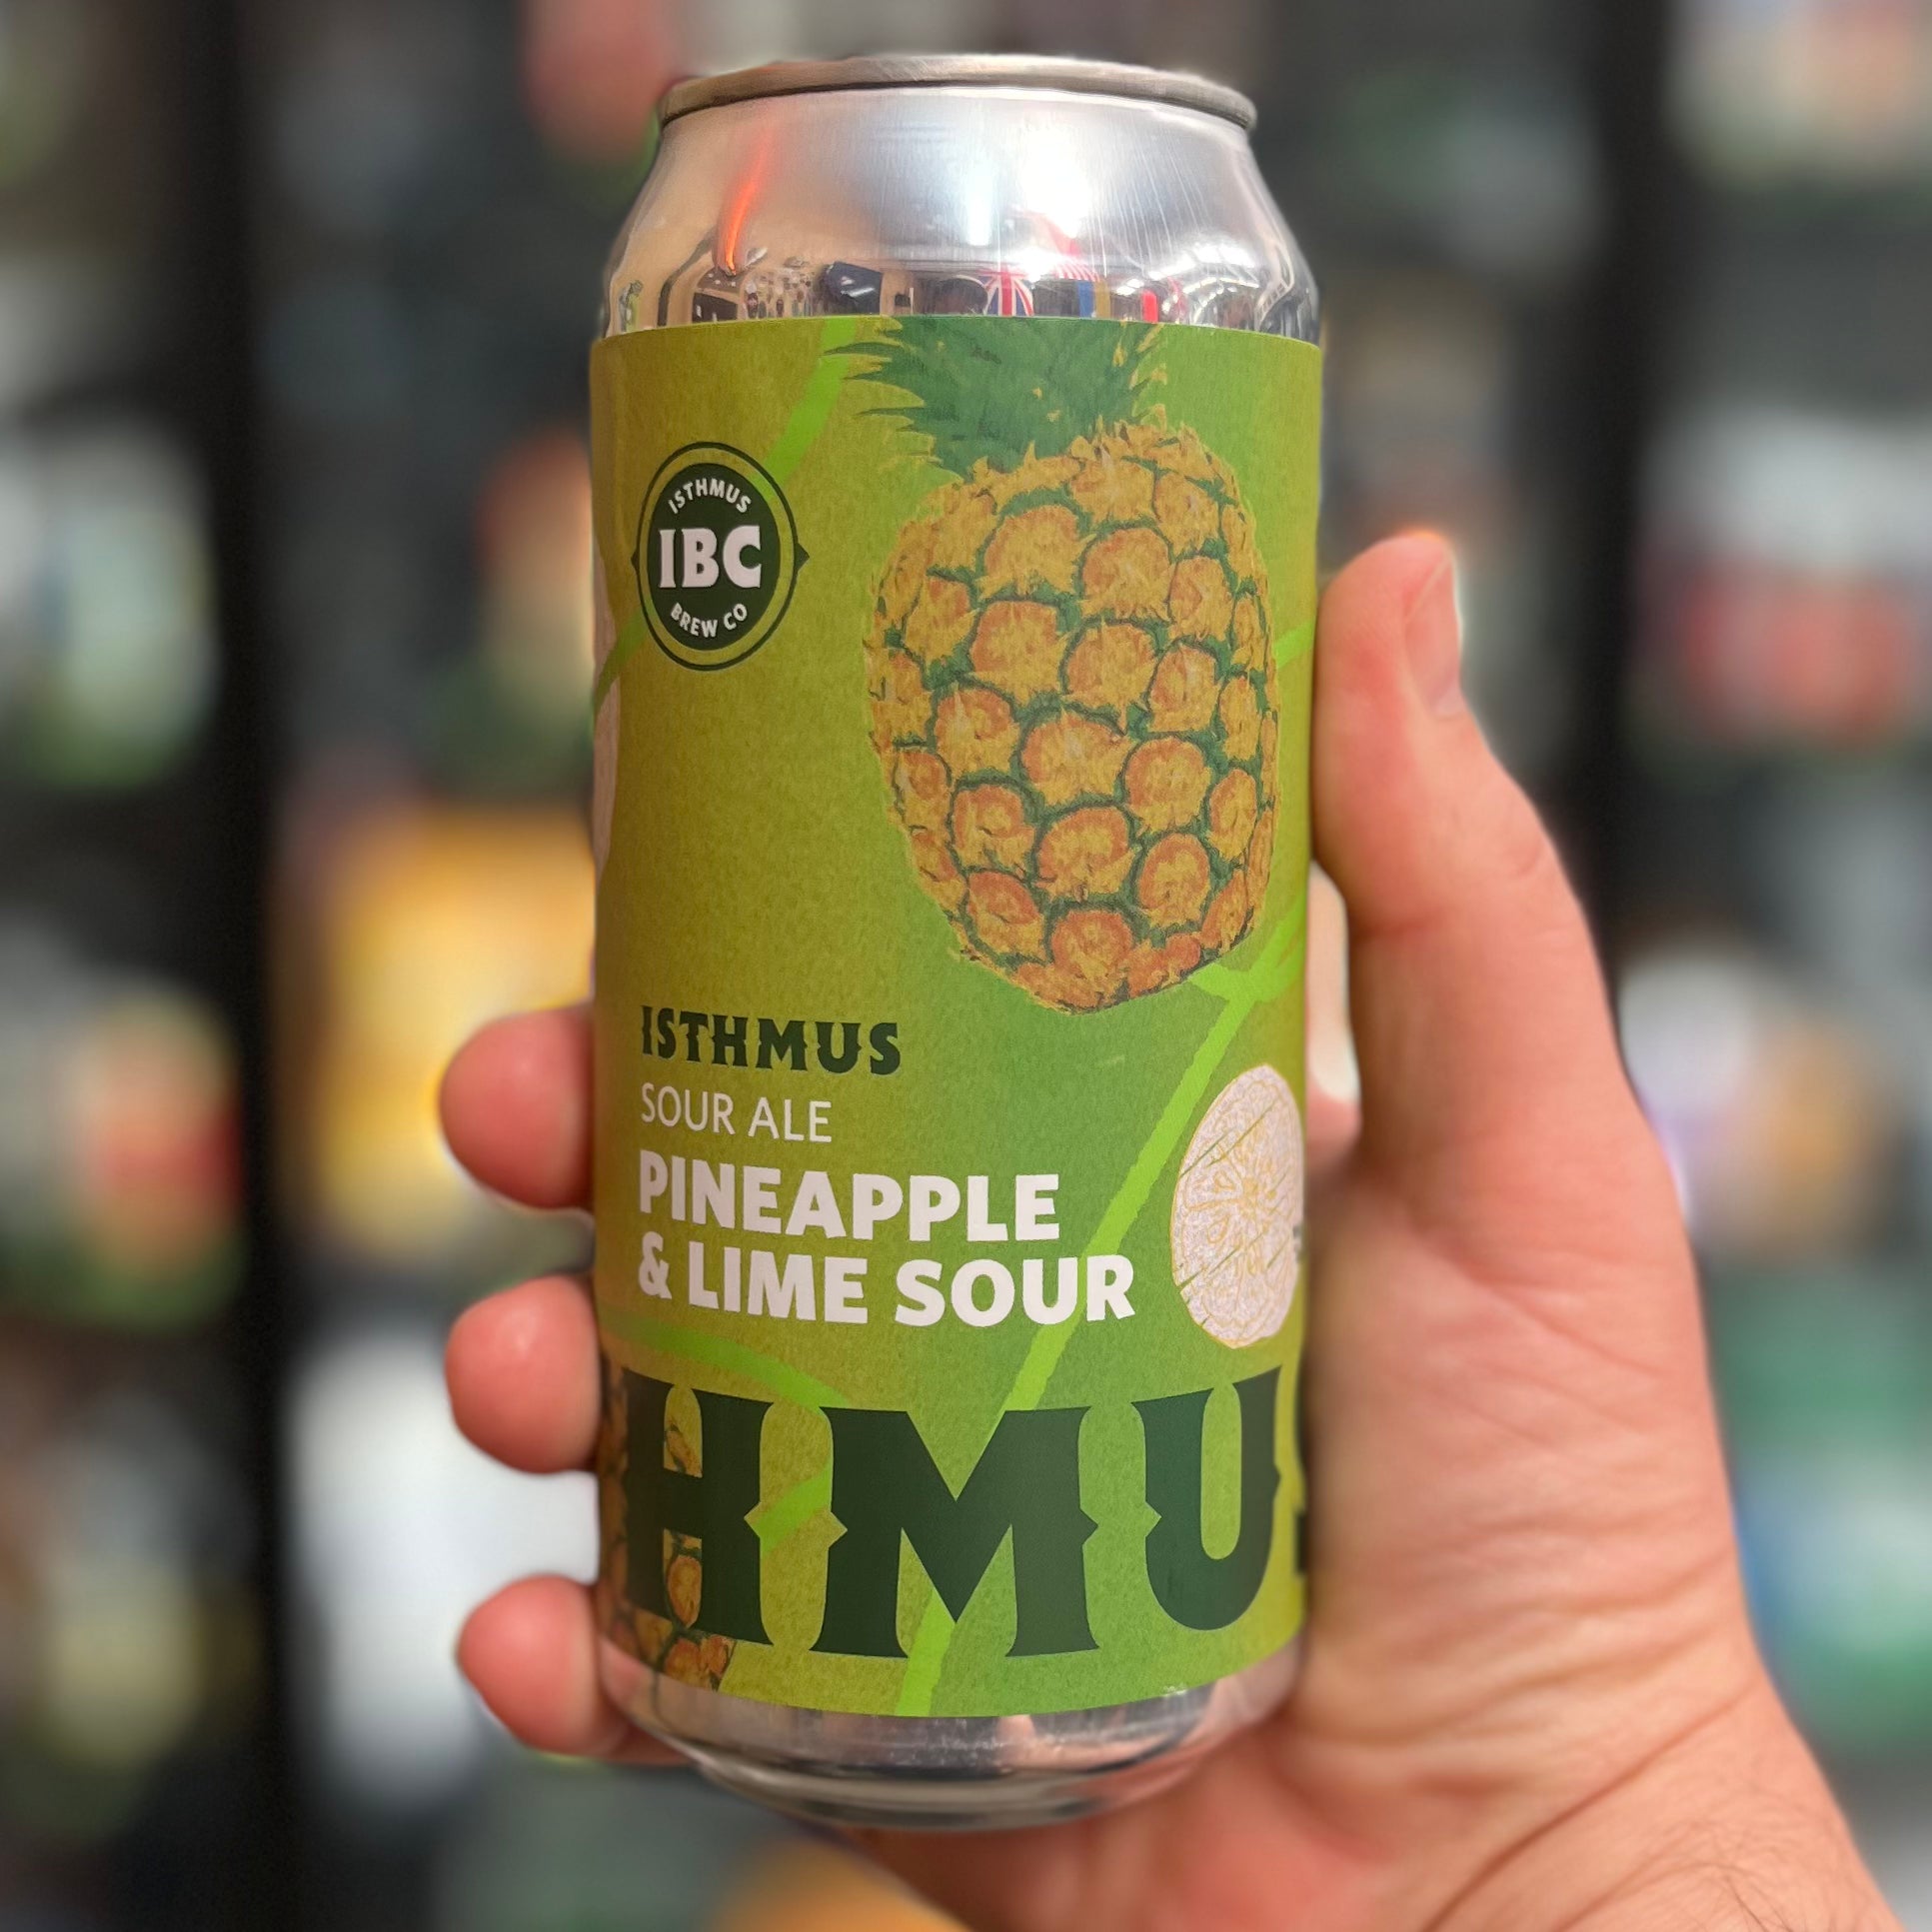 Isthmus Pineapple and Lime Sour